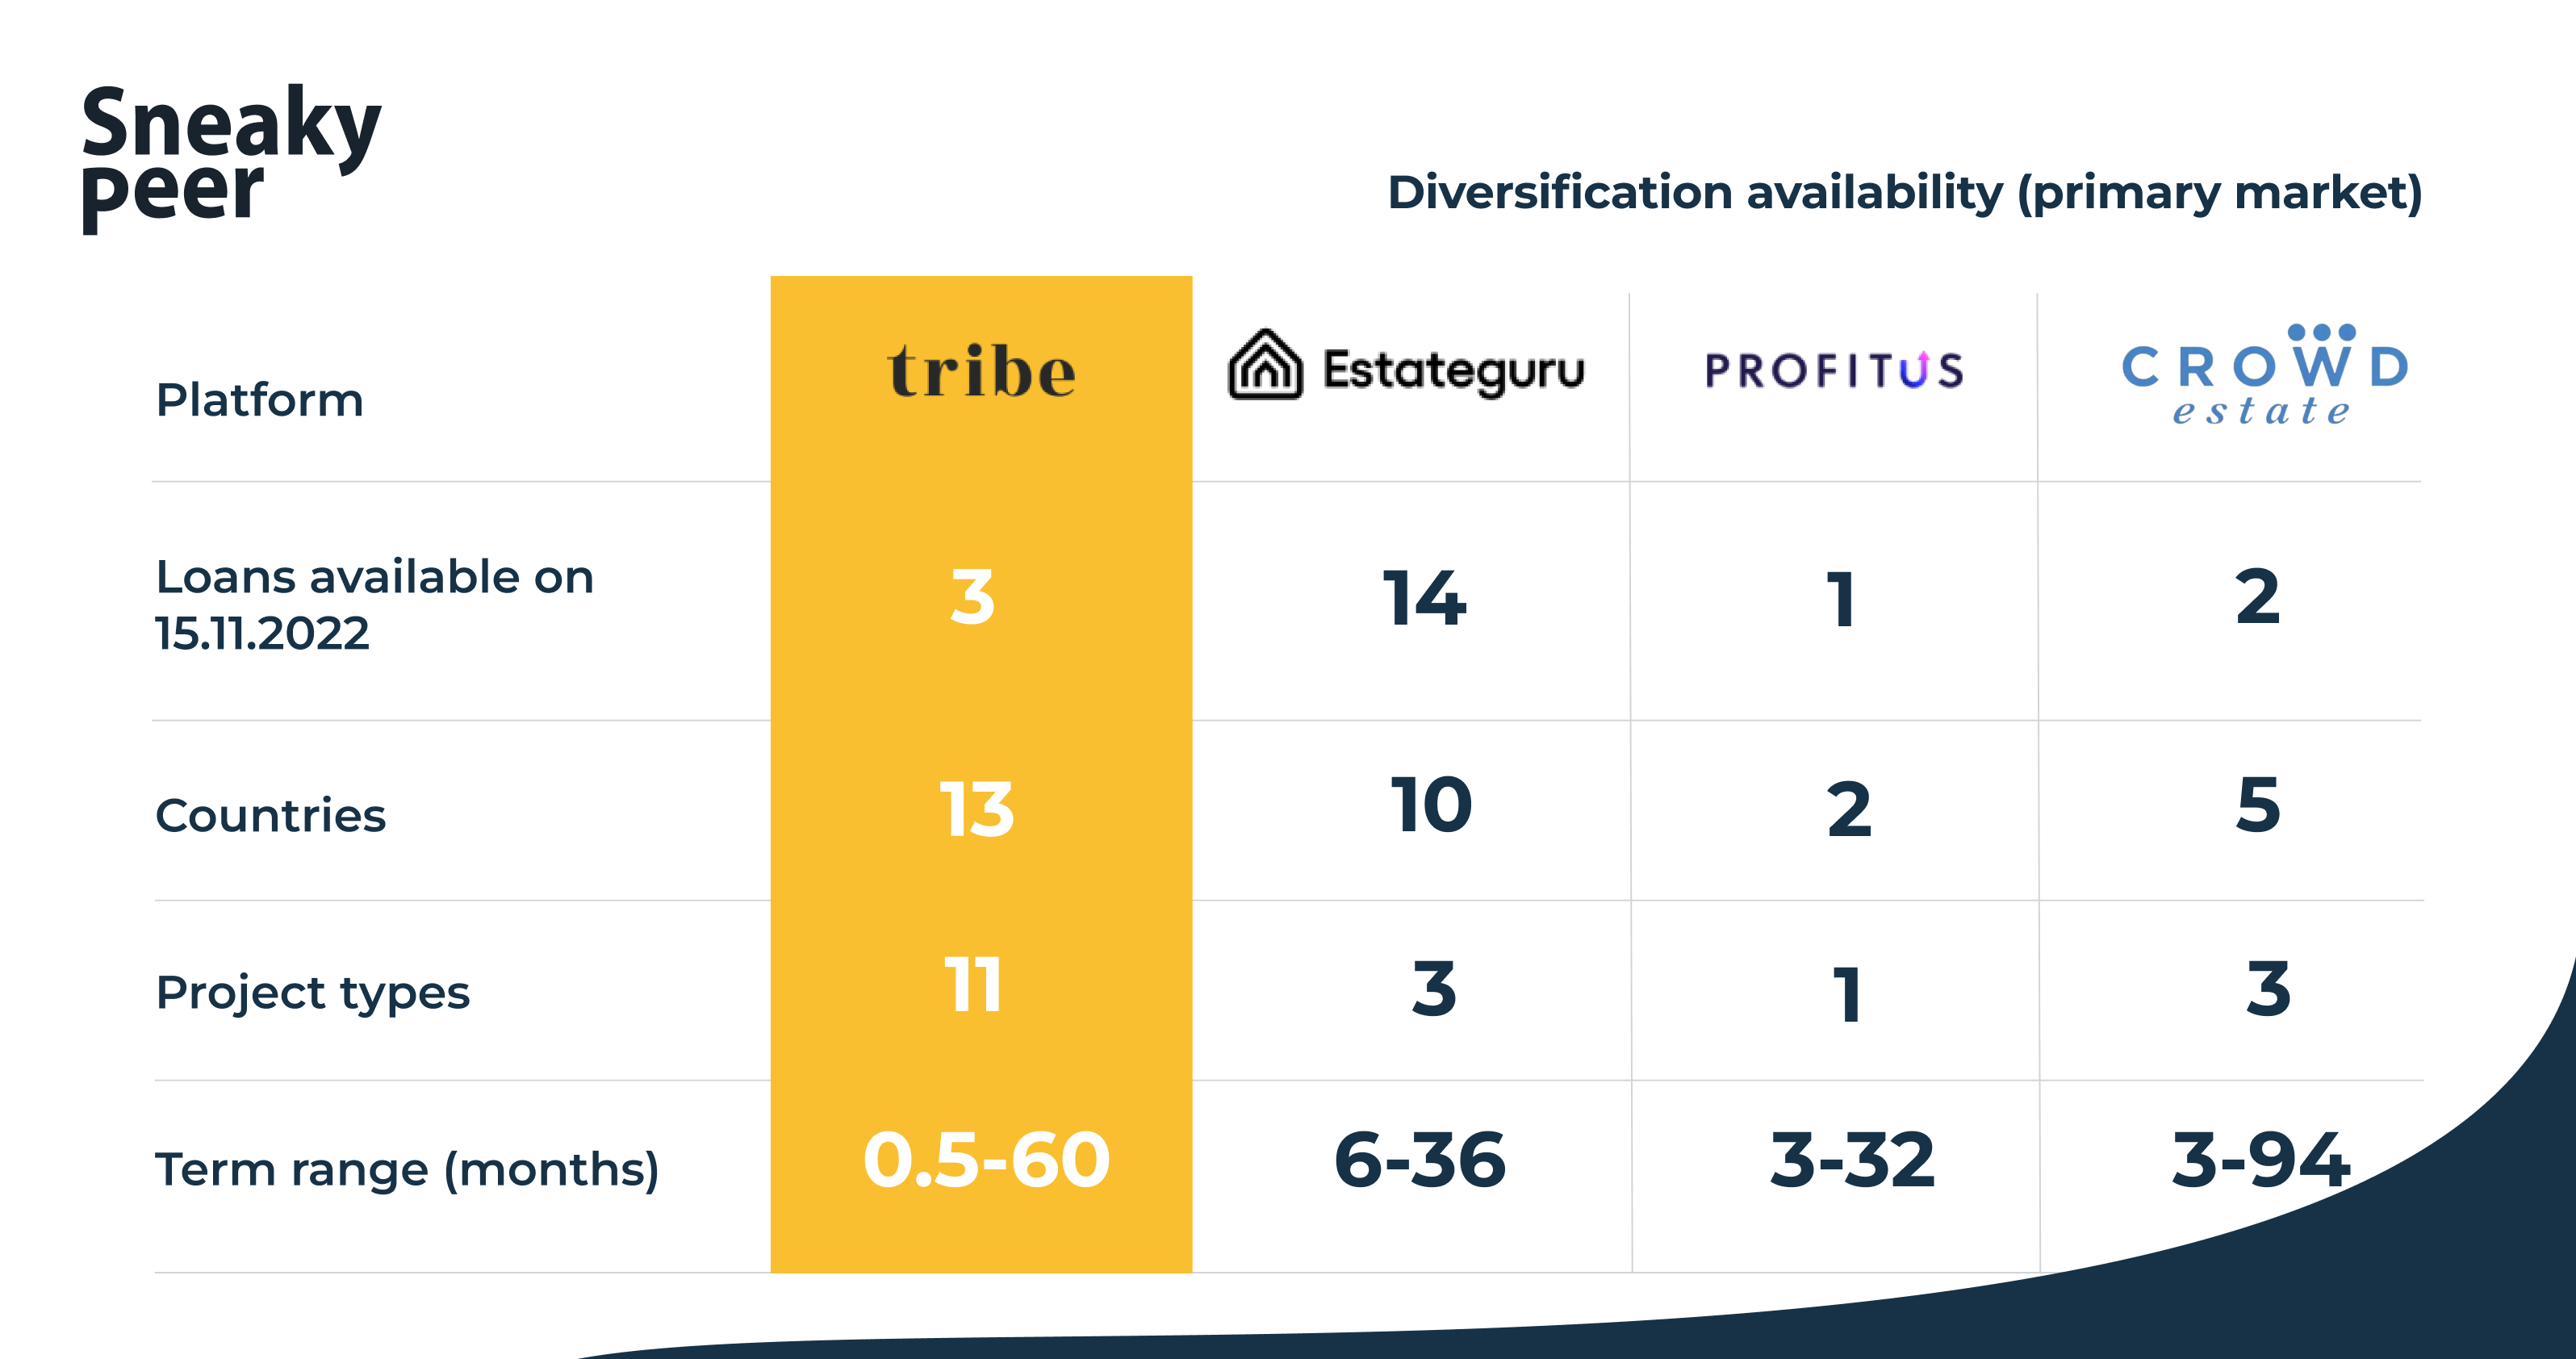 Diversification options compared between Tribe, Estateguru, Profitus and Crowdestate. While Estateguru offers the most loans at the moment, Tribe makes available more diverse investment opportunities than any other platform